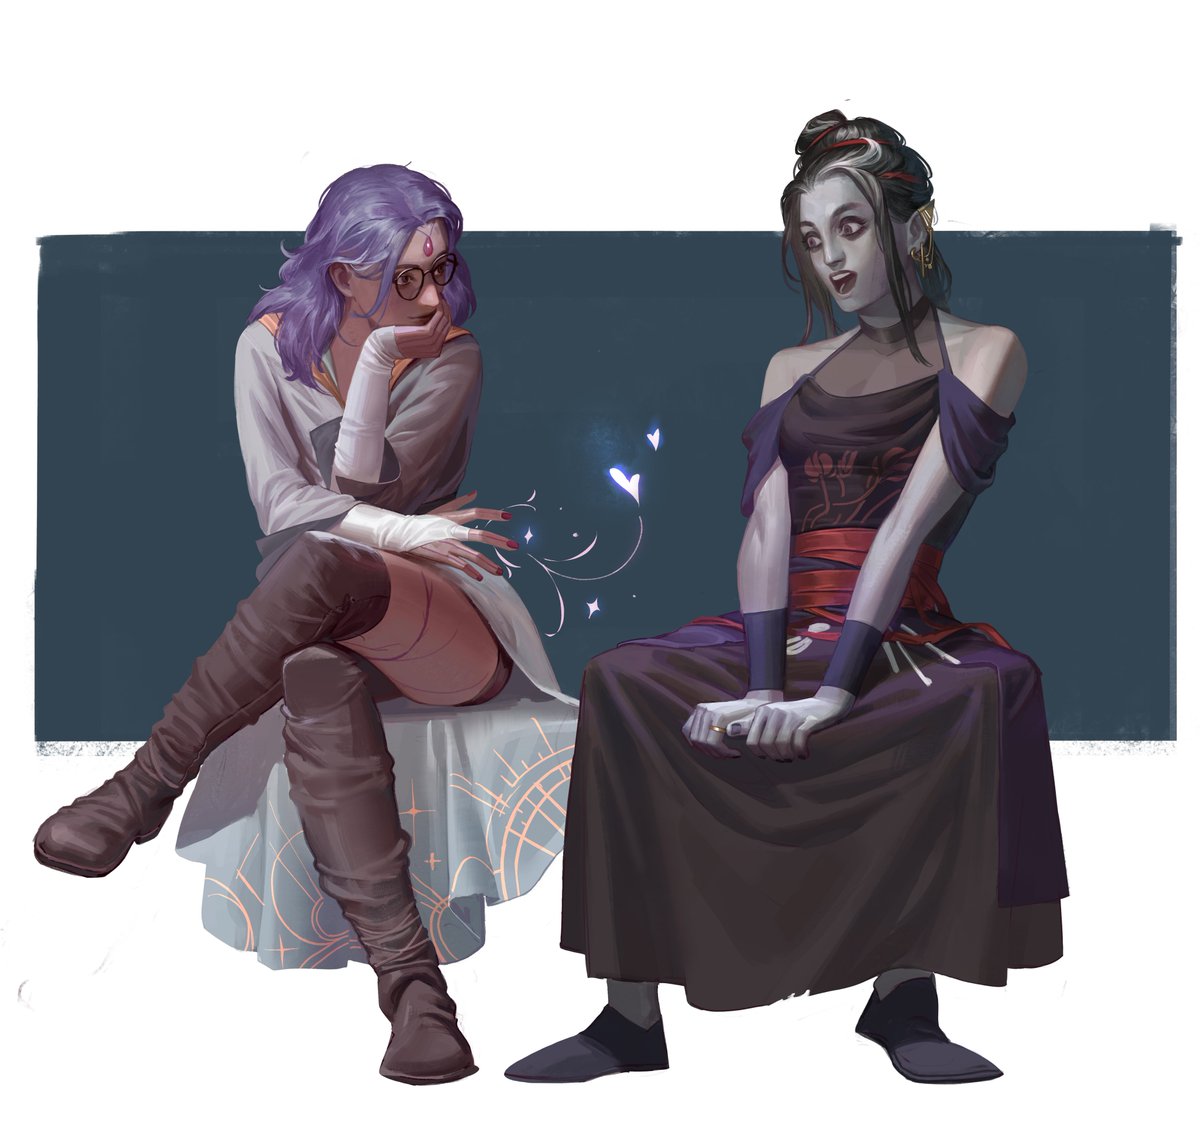 “You don't have to listen in to get my thoughts. You can just ask.”
laura and marisha are godsent. They were GOATs for giving us imodna <3 
#criticalrole #criticalrolefanart